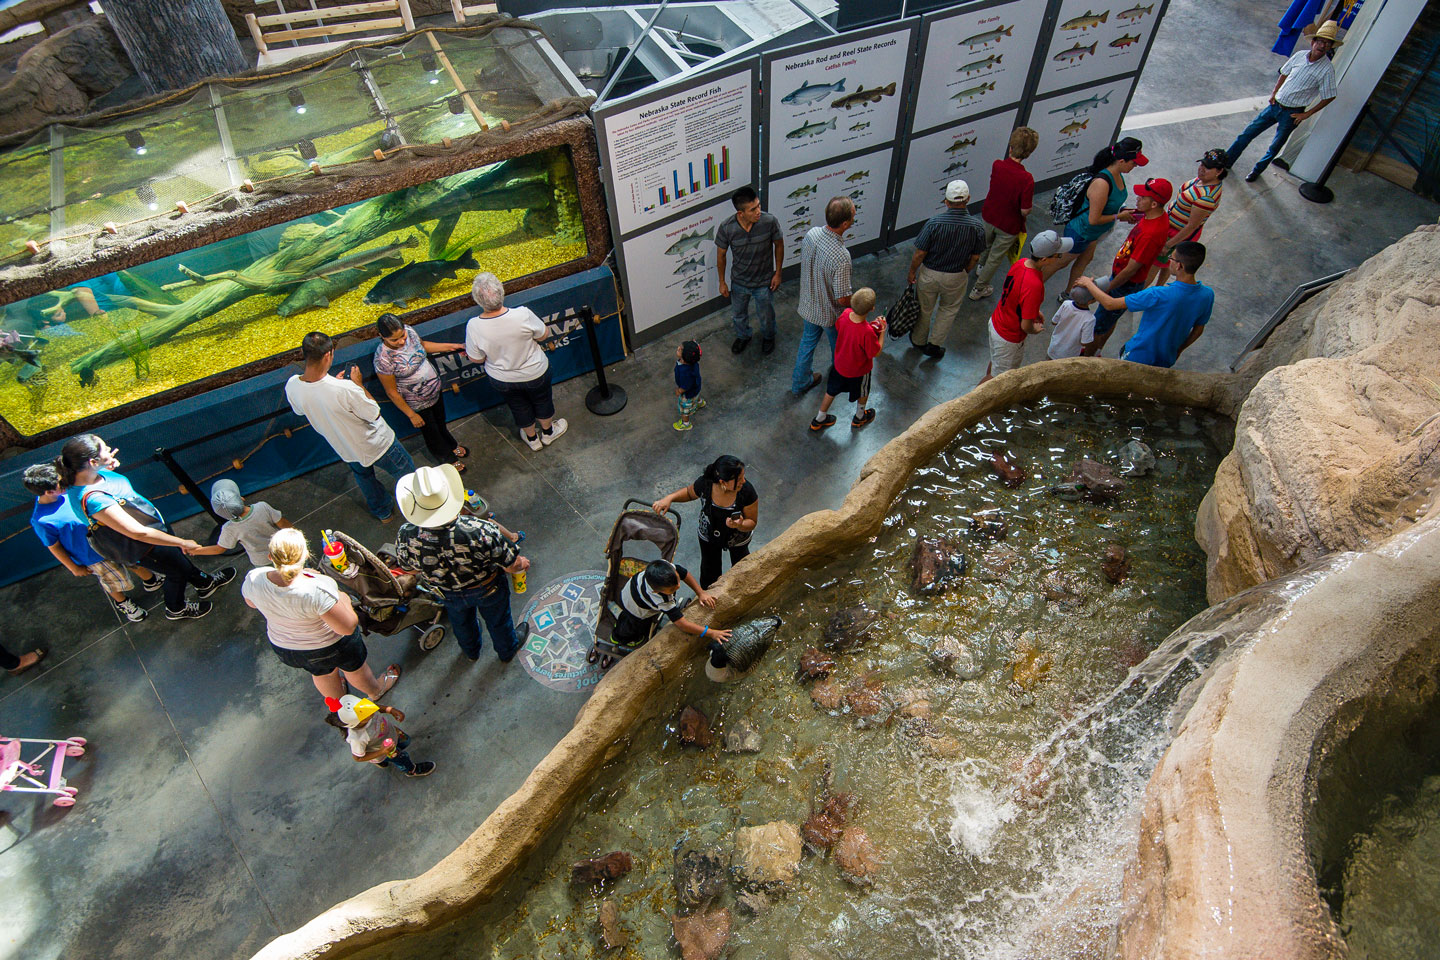 Aerial view of families walking through the Nebraska Game and Parks building displays and aquarium at the Nebraska State Fair.